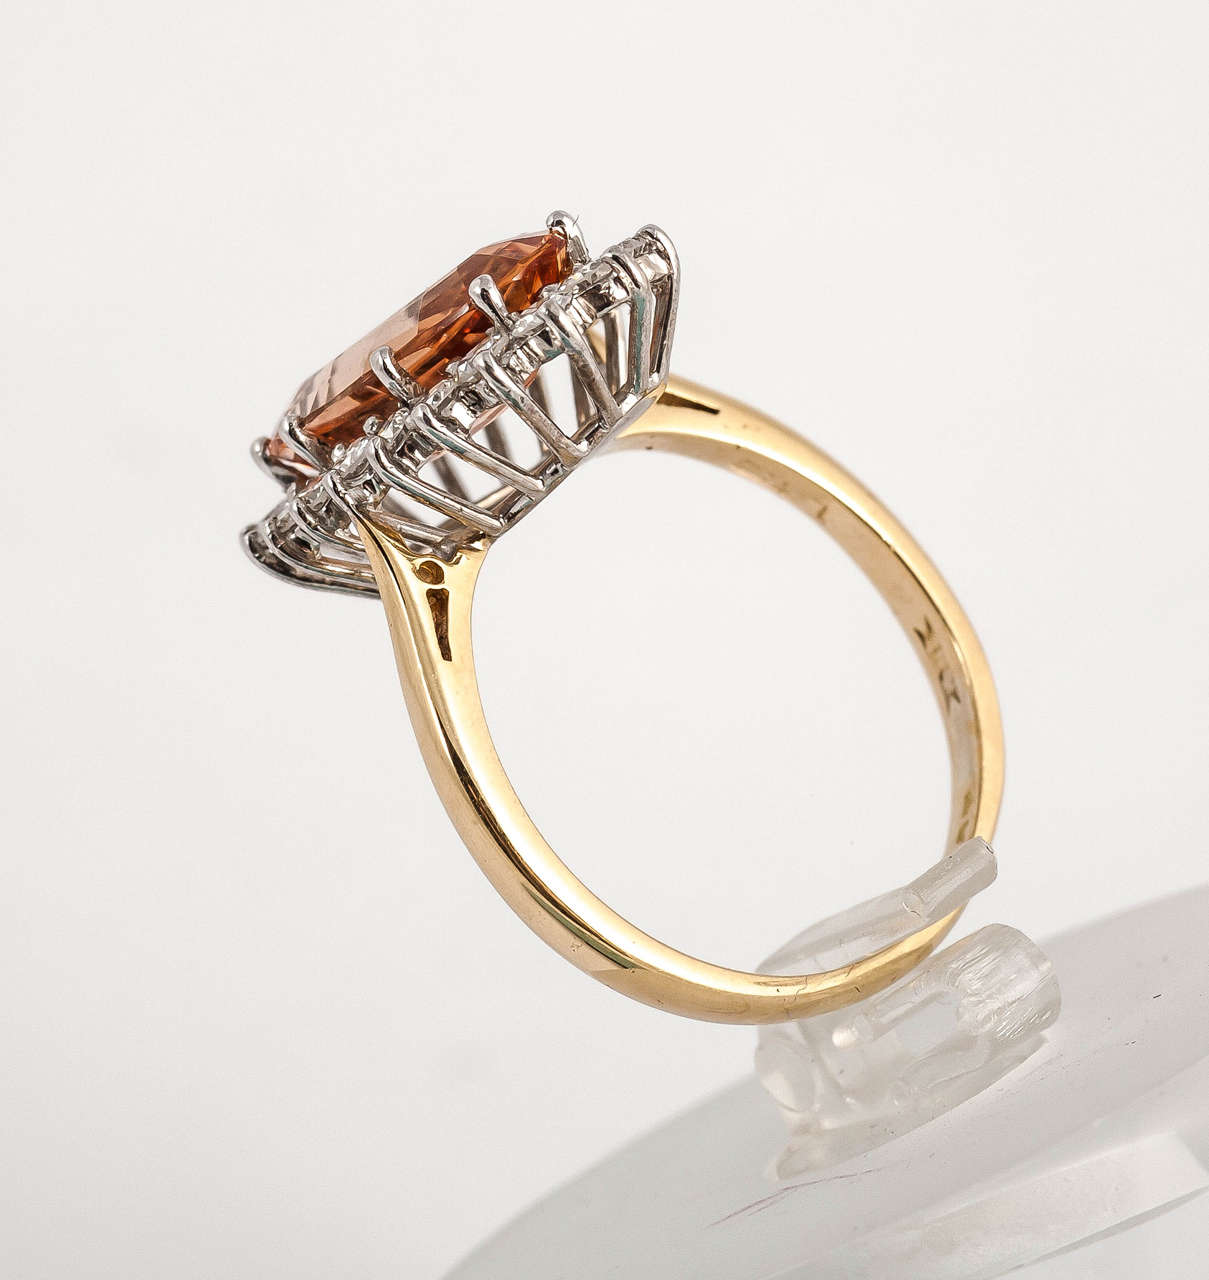 Fine colour Imperial topaz ring surrounded by diamonds set in 18ct Gold
Finger size N 1/4